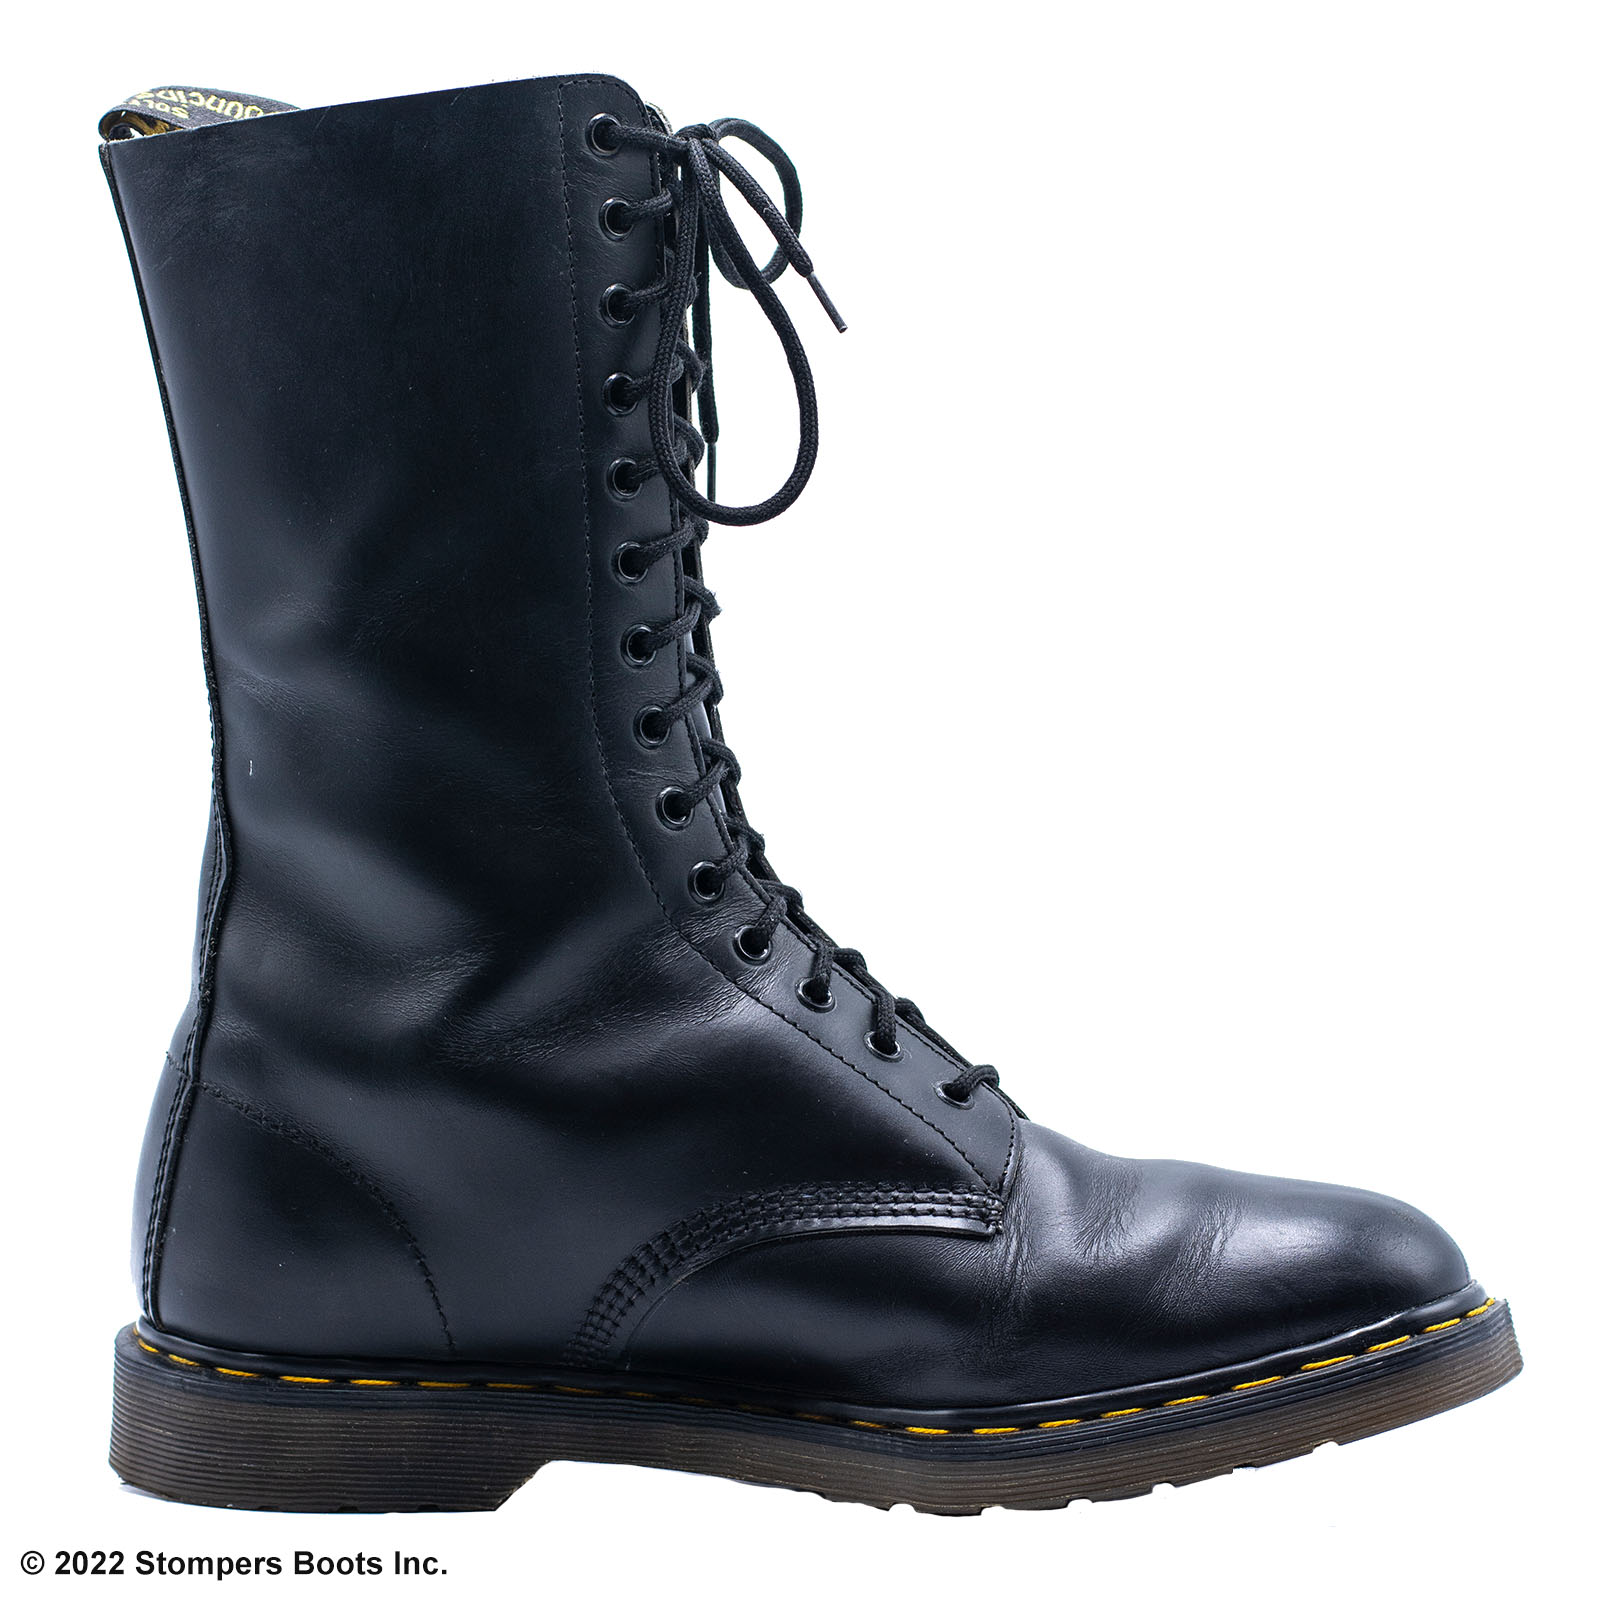 Shop Doc Martens 14-Eye Airwair Black Size 12D | Stompers Boots